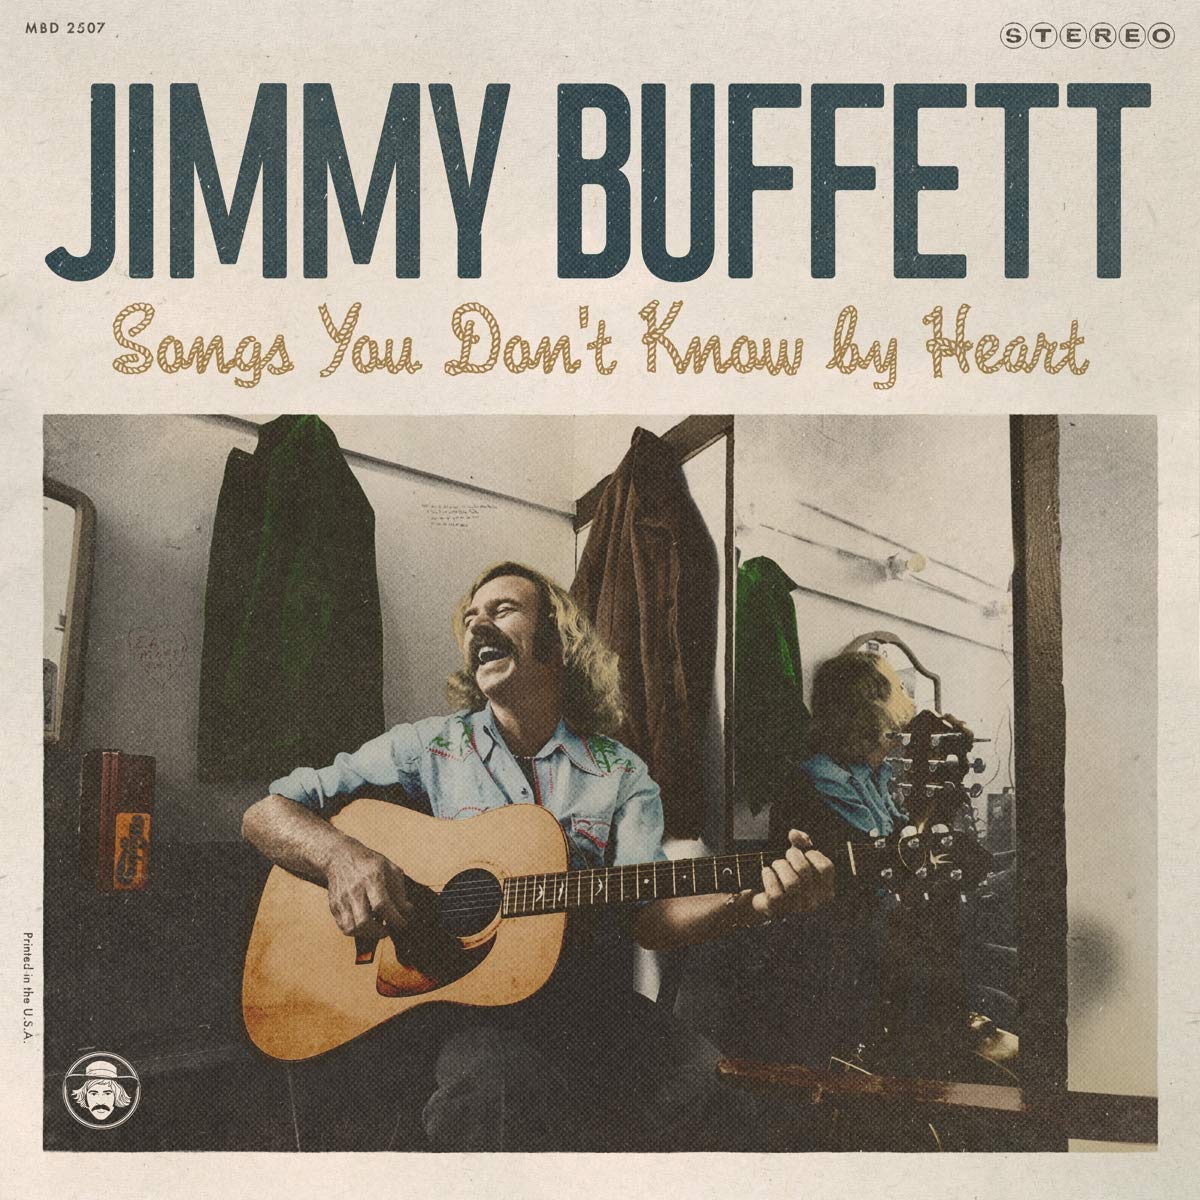 CD - Jimmy Buffett - Songs You Don't Know By Heart